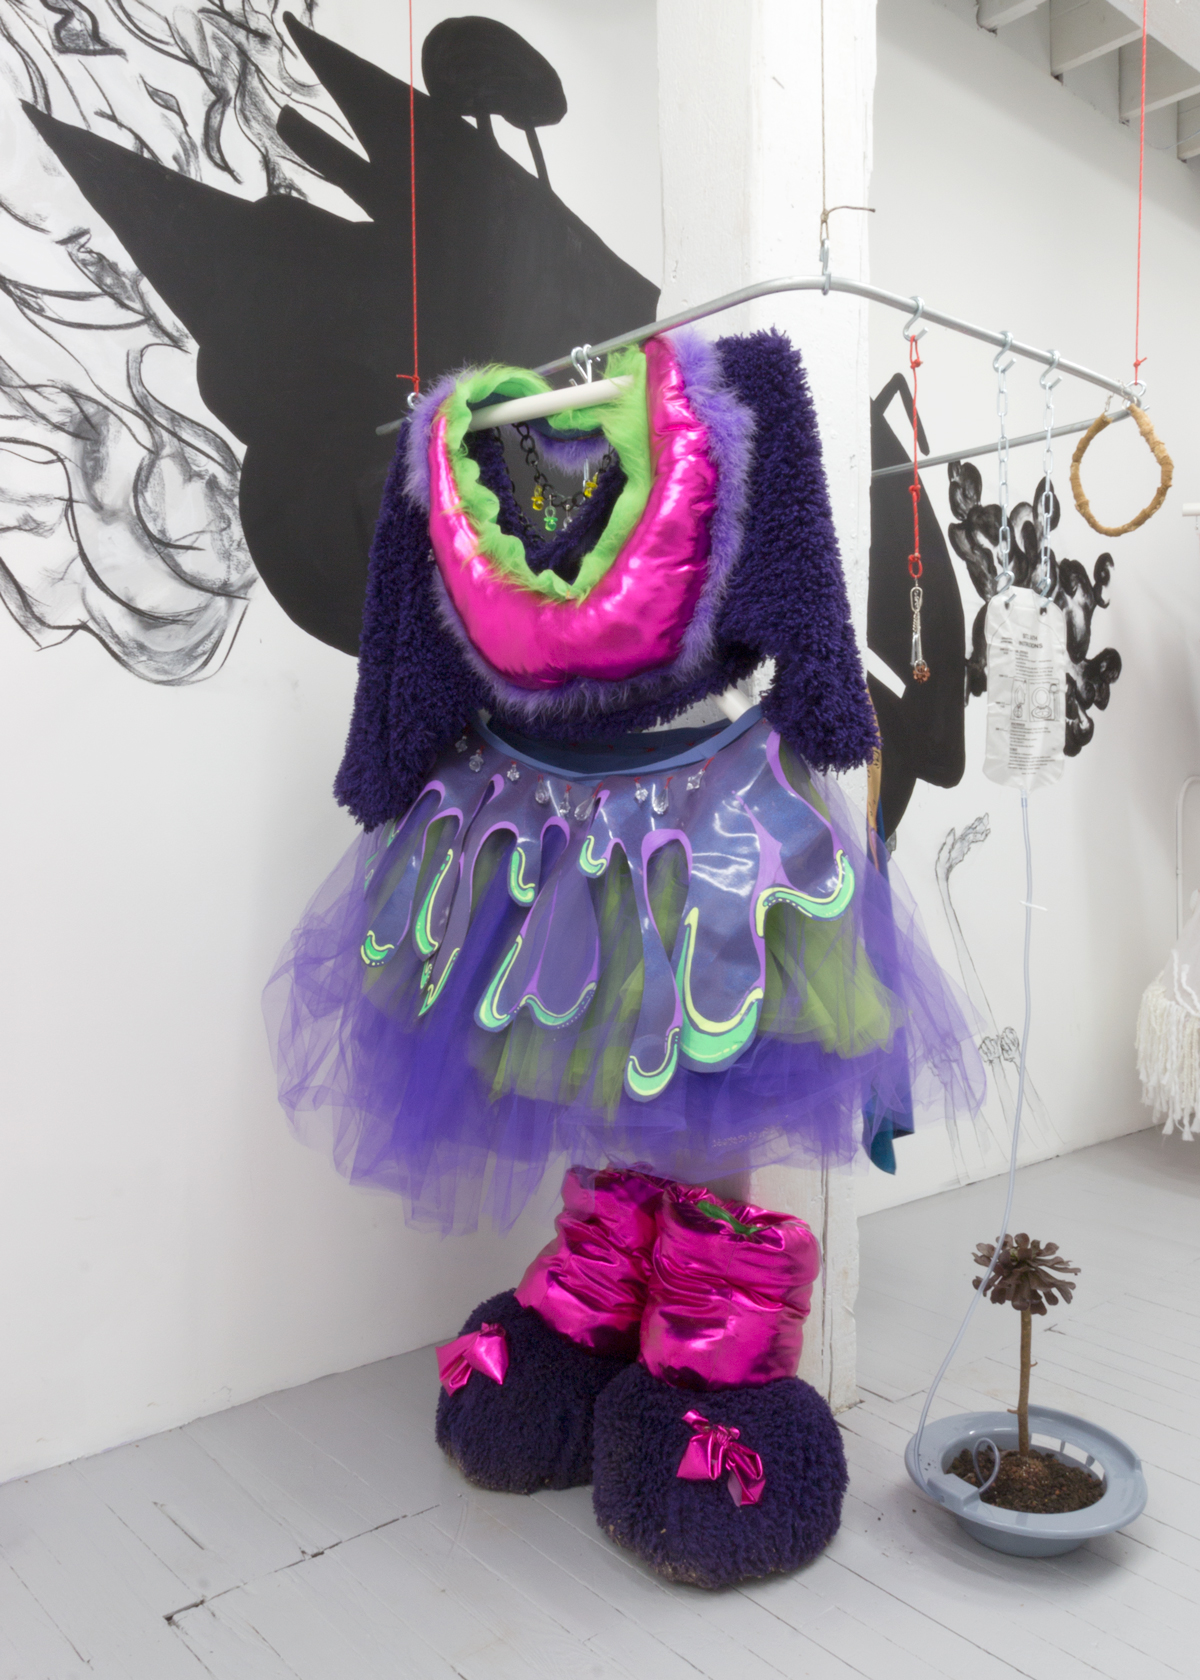 A colorful pink and purple costume hung on a metal rack with a sculpture of a plant in a sitz bath on the floor beside it